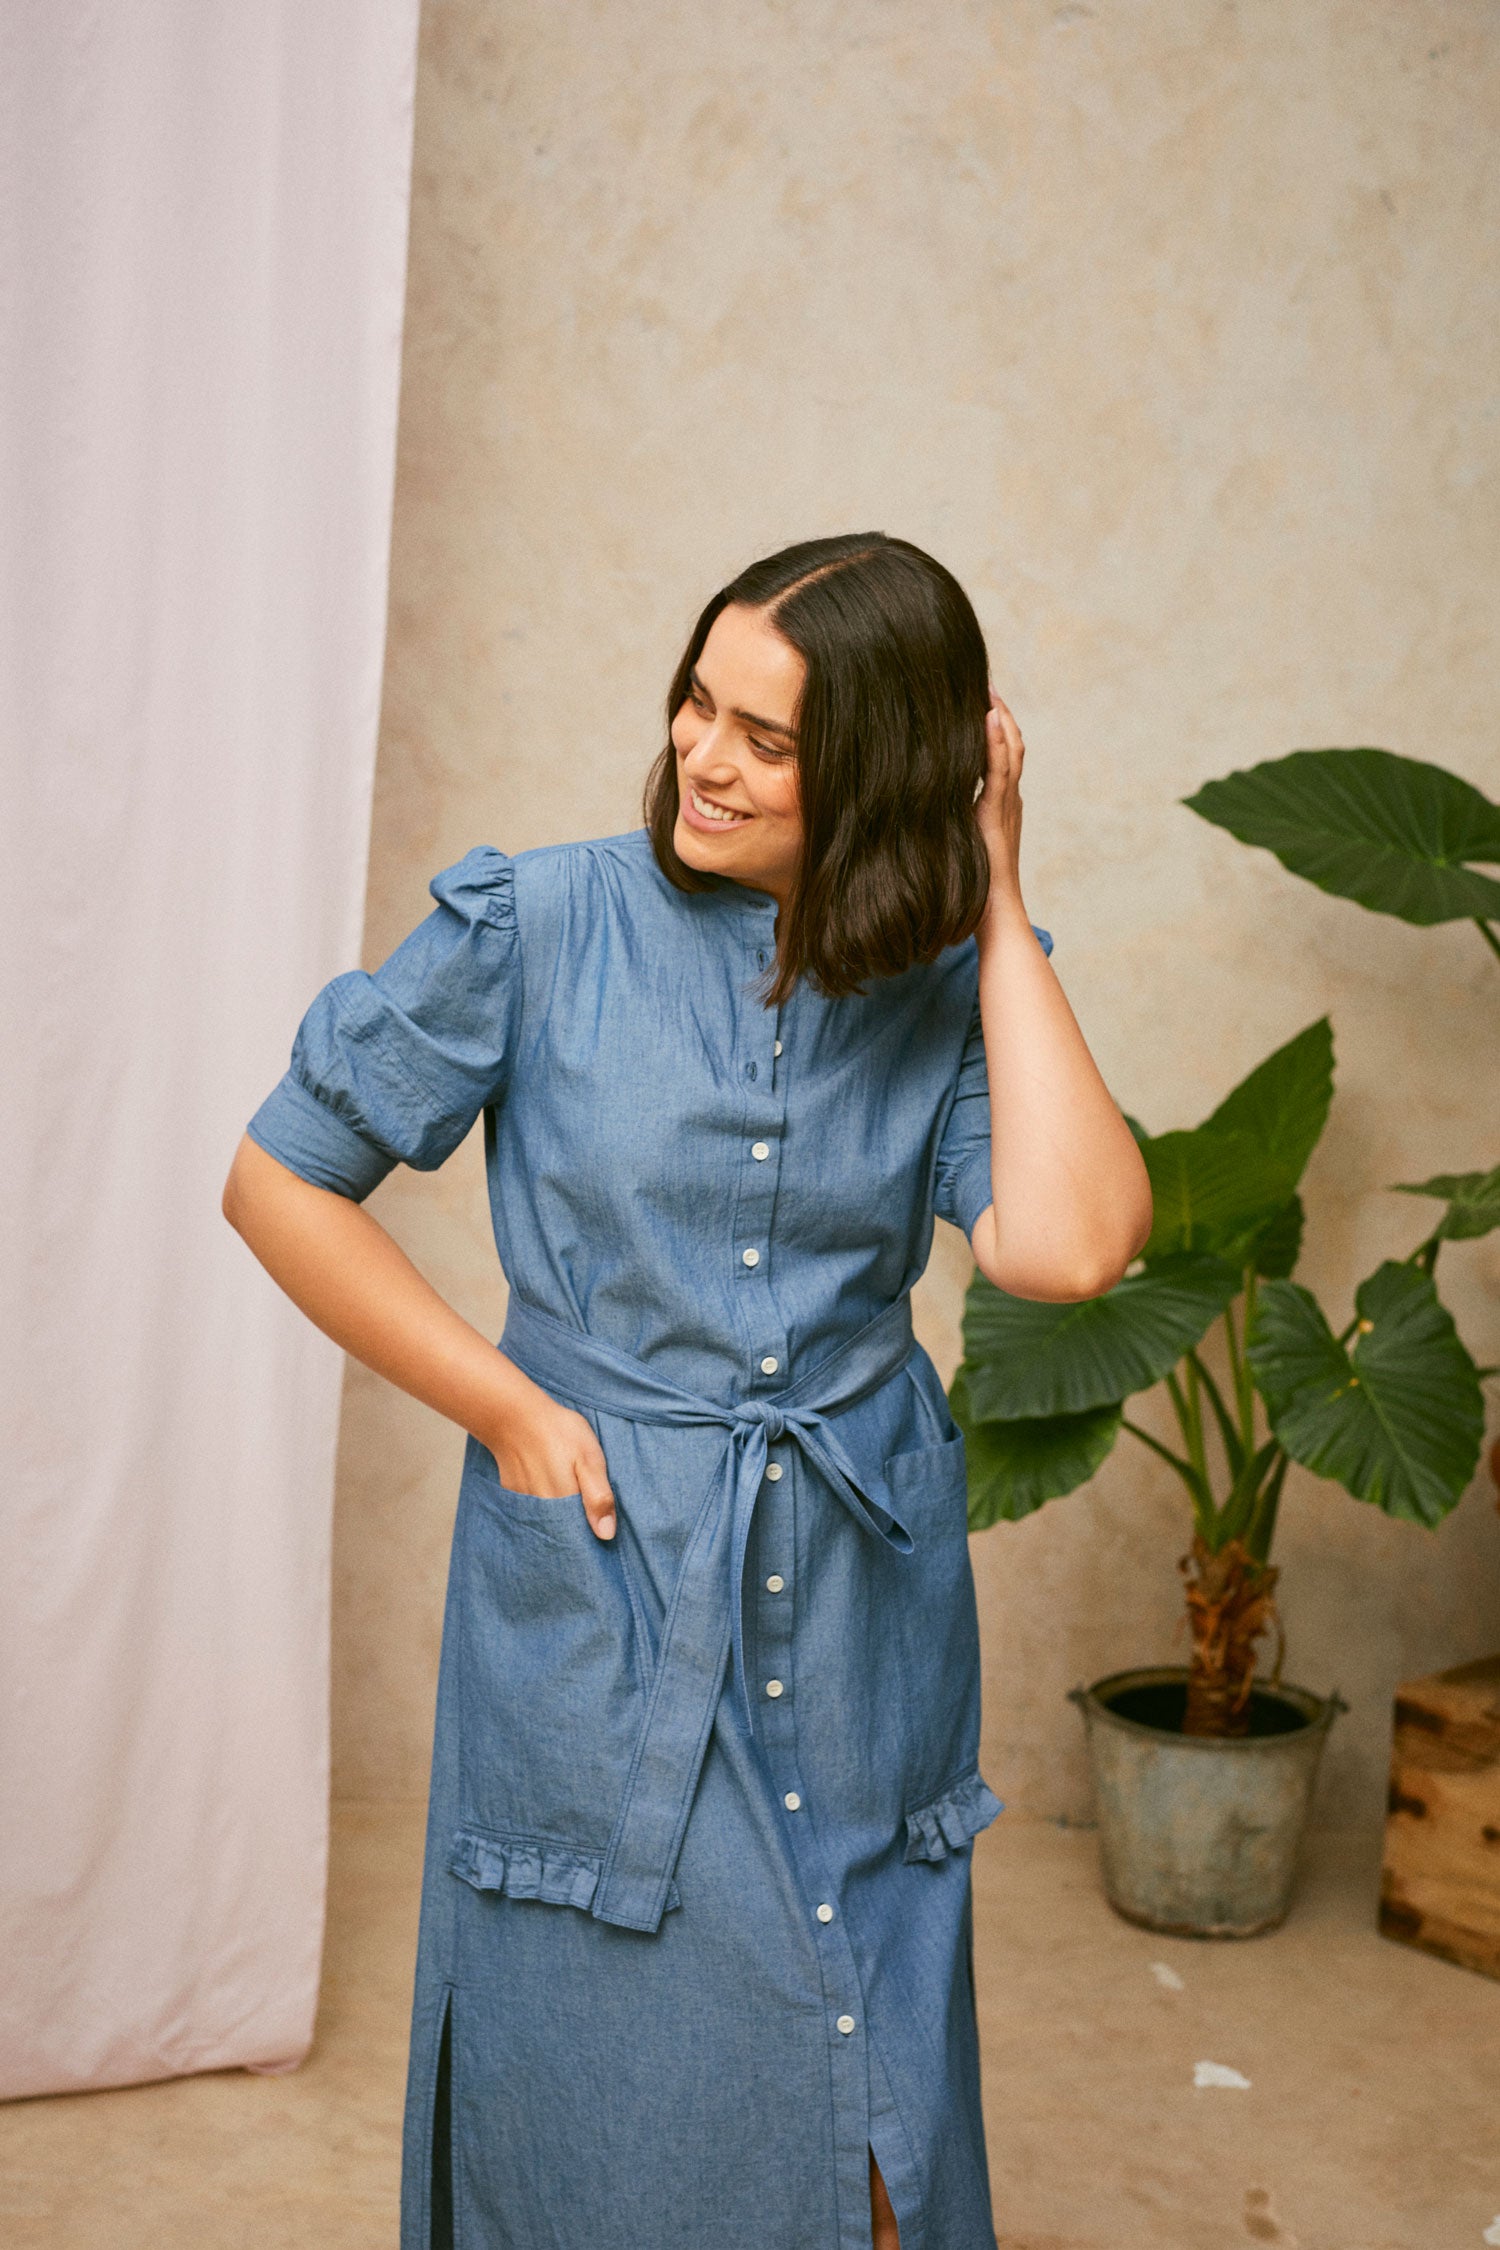 Model wears Saywood's Rosa denim shirtdress in light wash Japanese denim; a long line style with patch pockets and ruffles, a belt tied round the waist. She smiles with her hand to the back of her head. A plant and drop of pink fabric can be seen in the background.